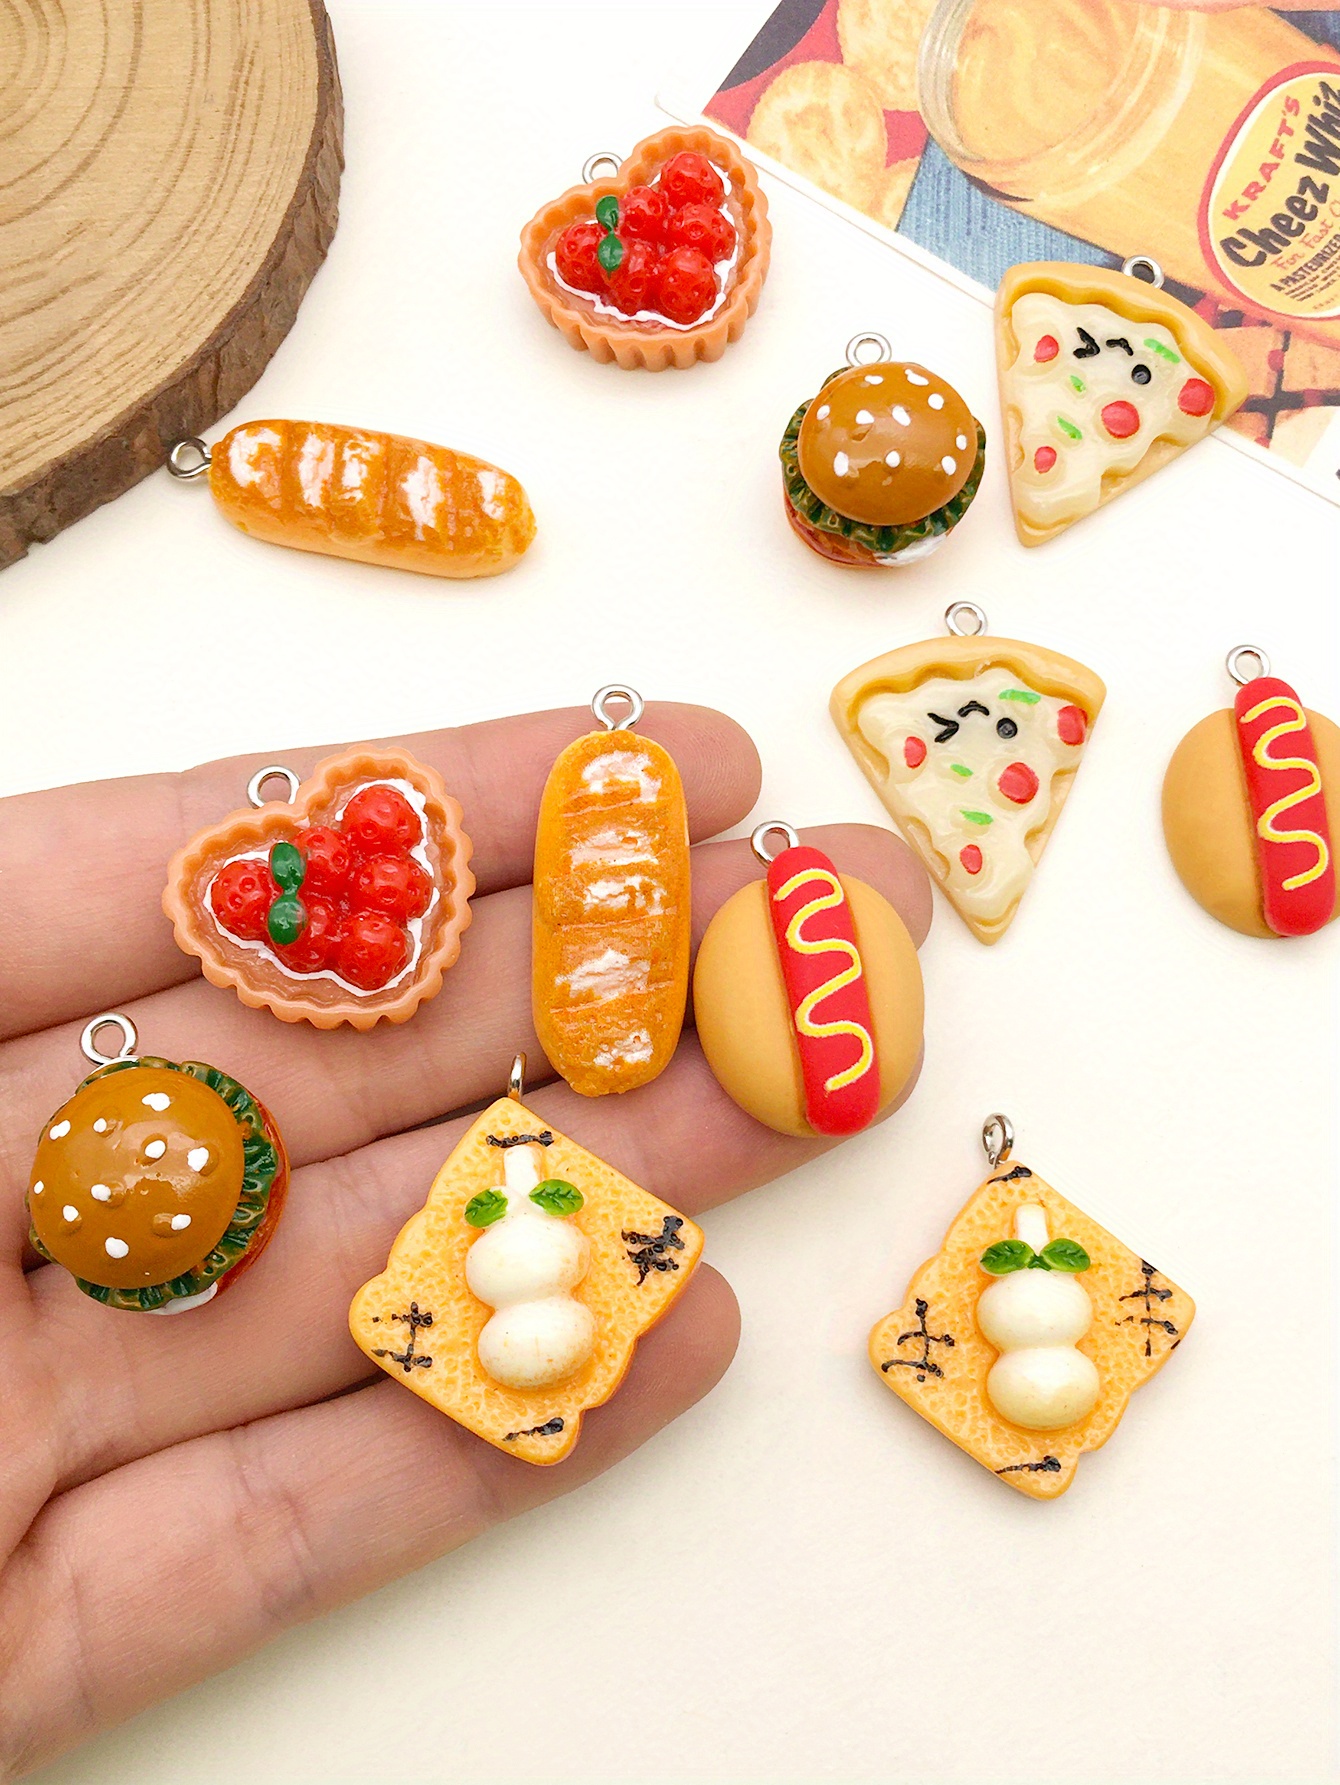 Imitation Food Charms, Bread Jewelry Charm, Bread Resin Charms